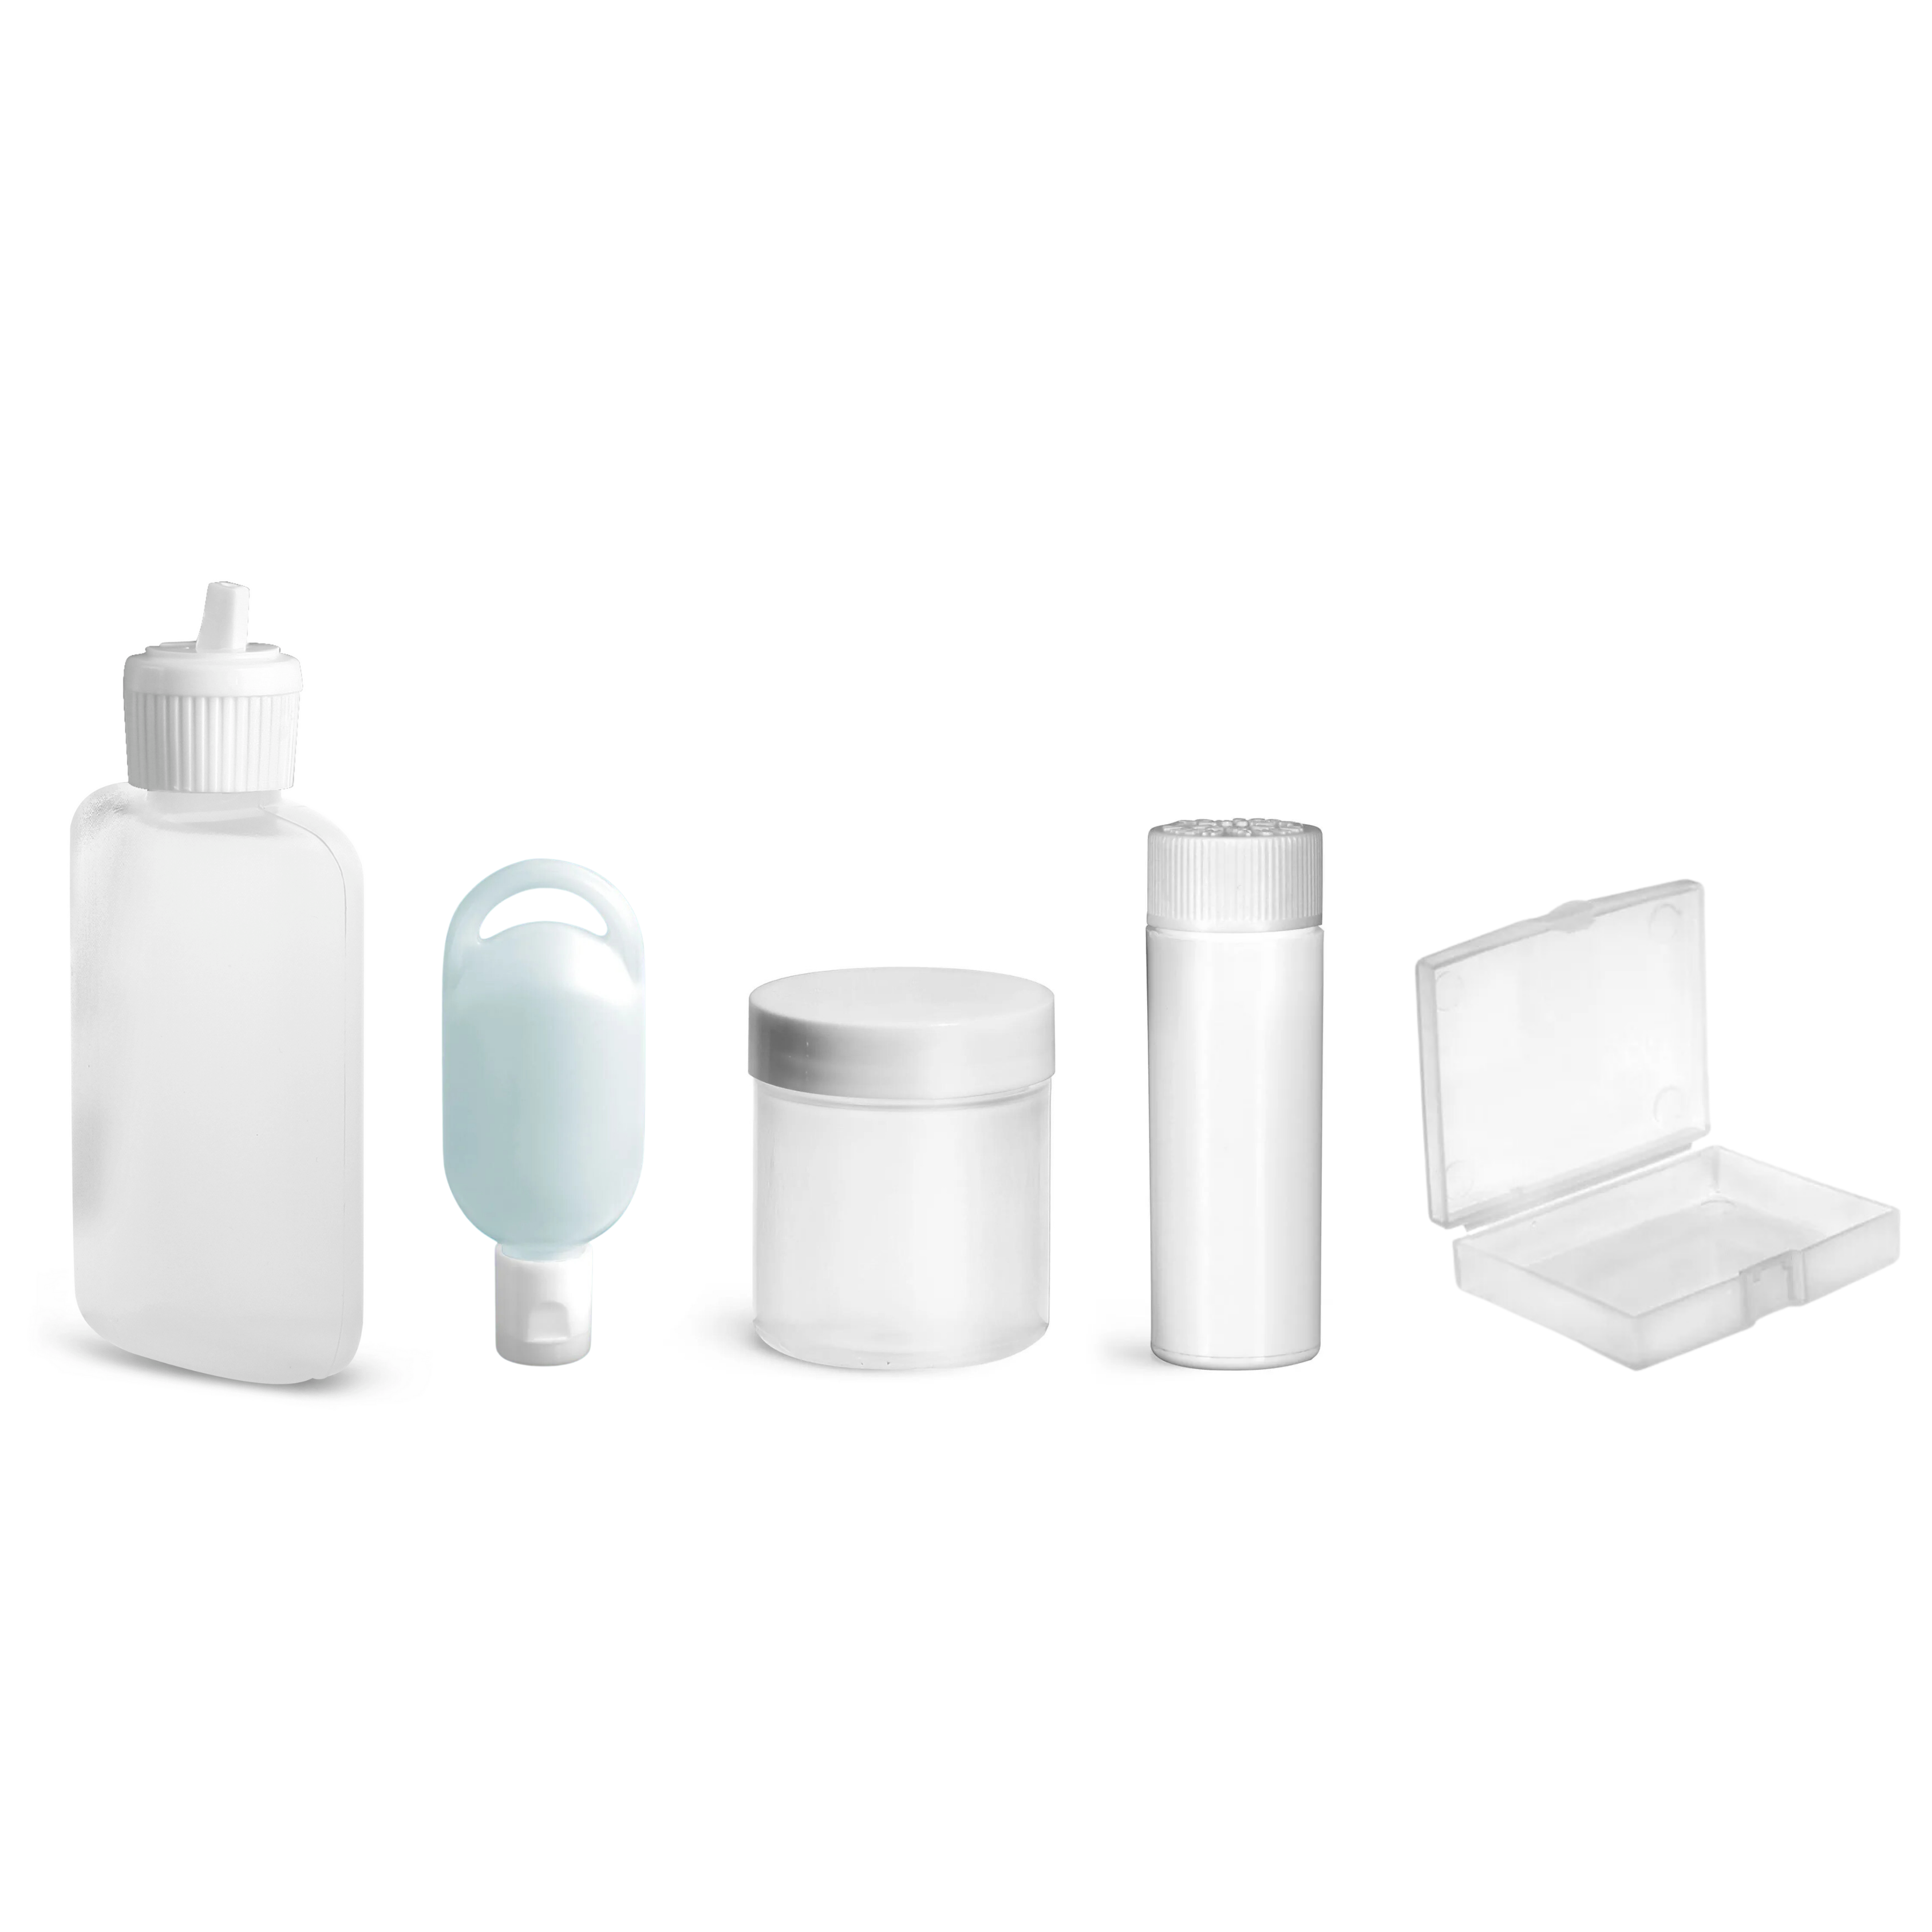 Hotel Amenity Containers from SKS Bottle & Packaging